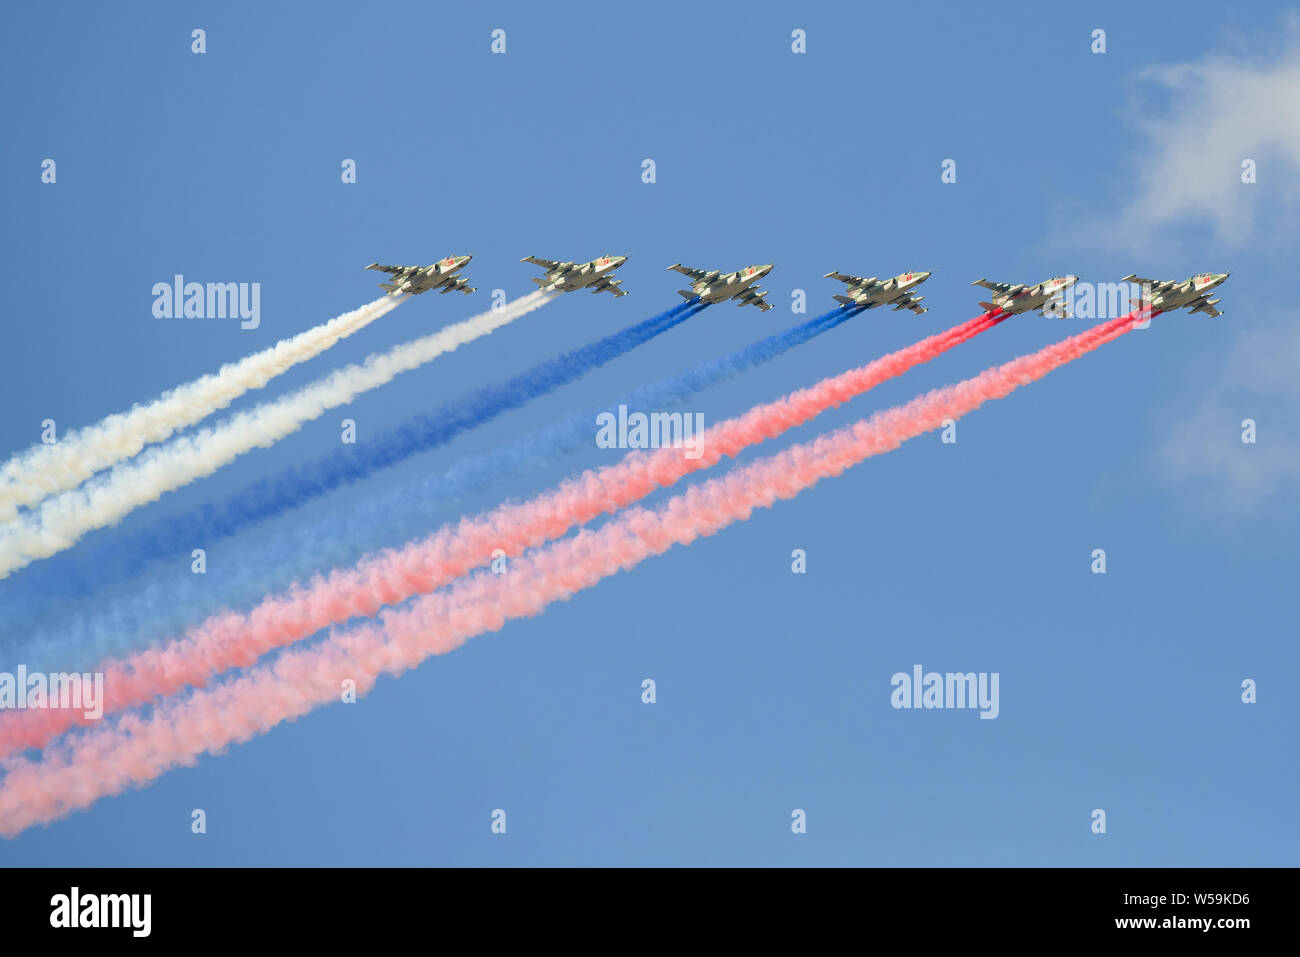 SAINT-PETERSBURG, RUSSIA - JULY 25, 2018: Russian Su-25 attack aircraft with smoke colors of the Russian flag. Fragment of the dress rehearsal of the Stock Photo